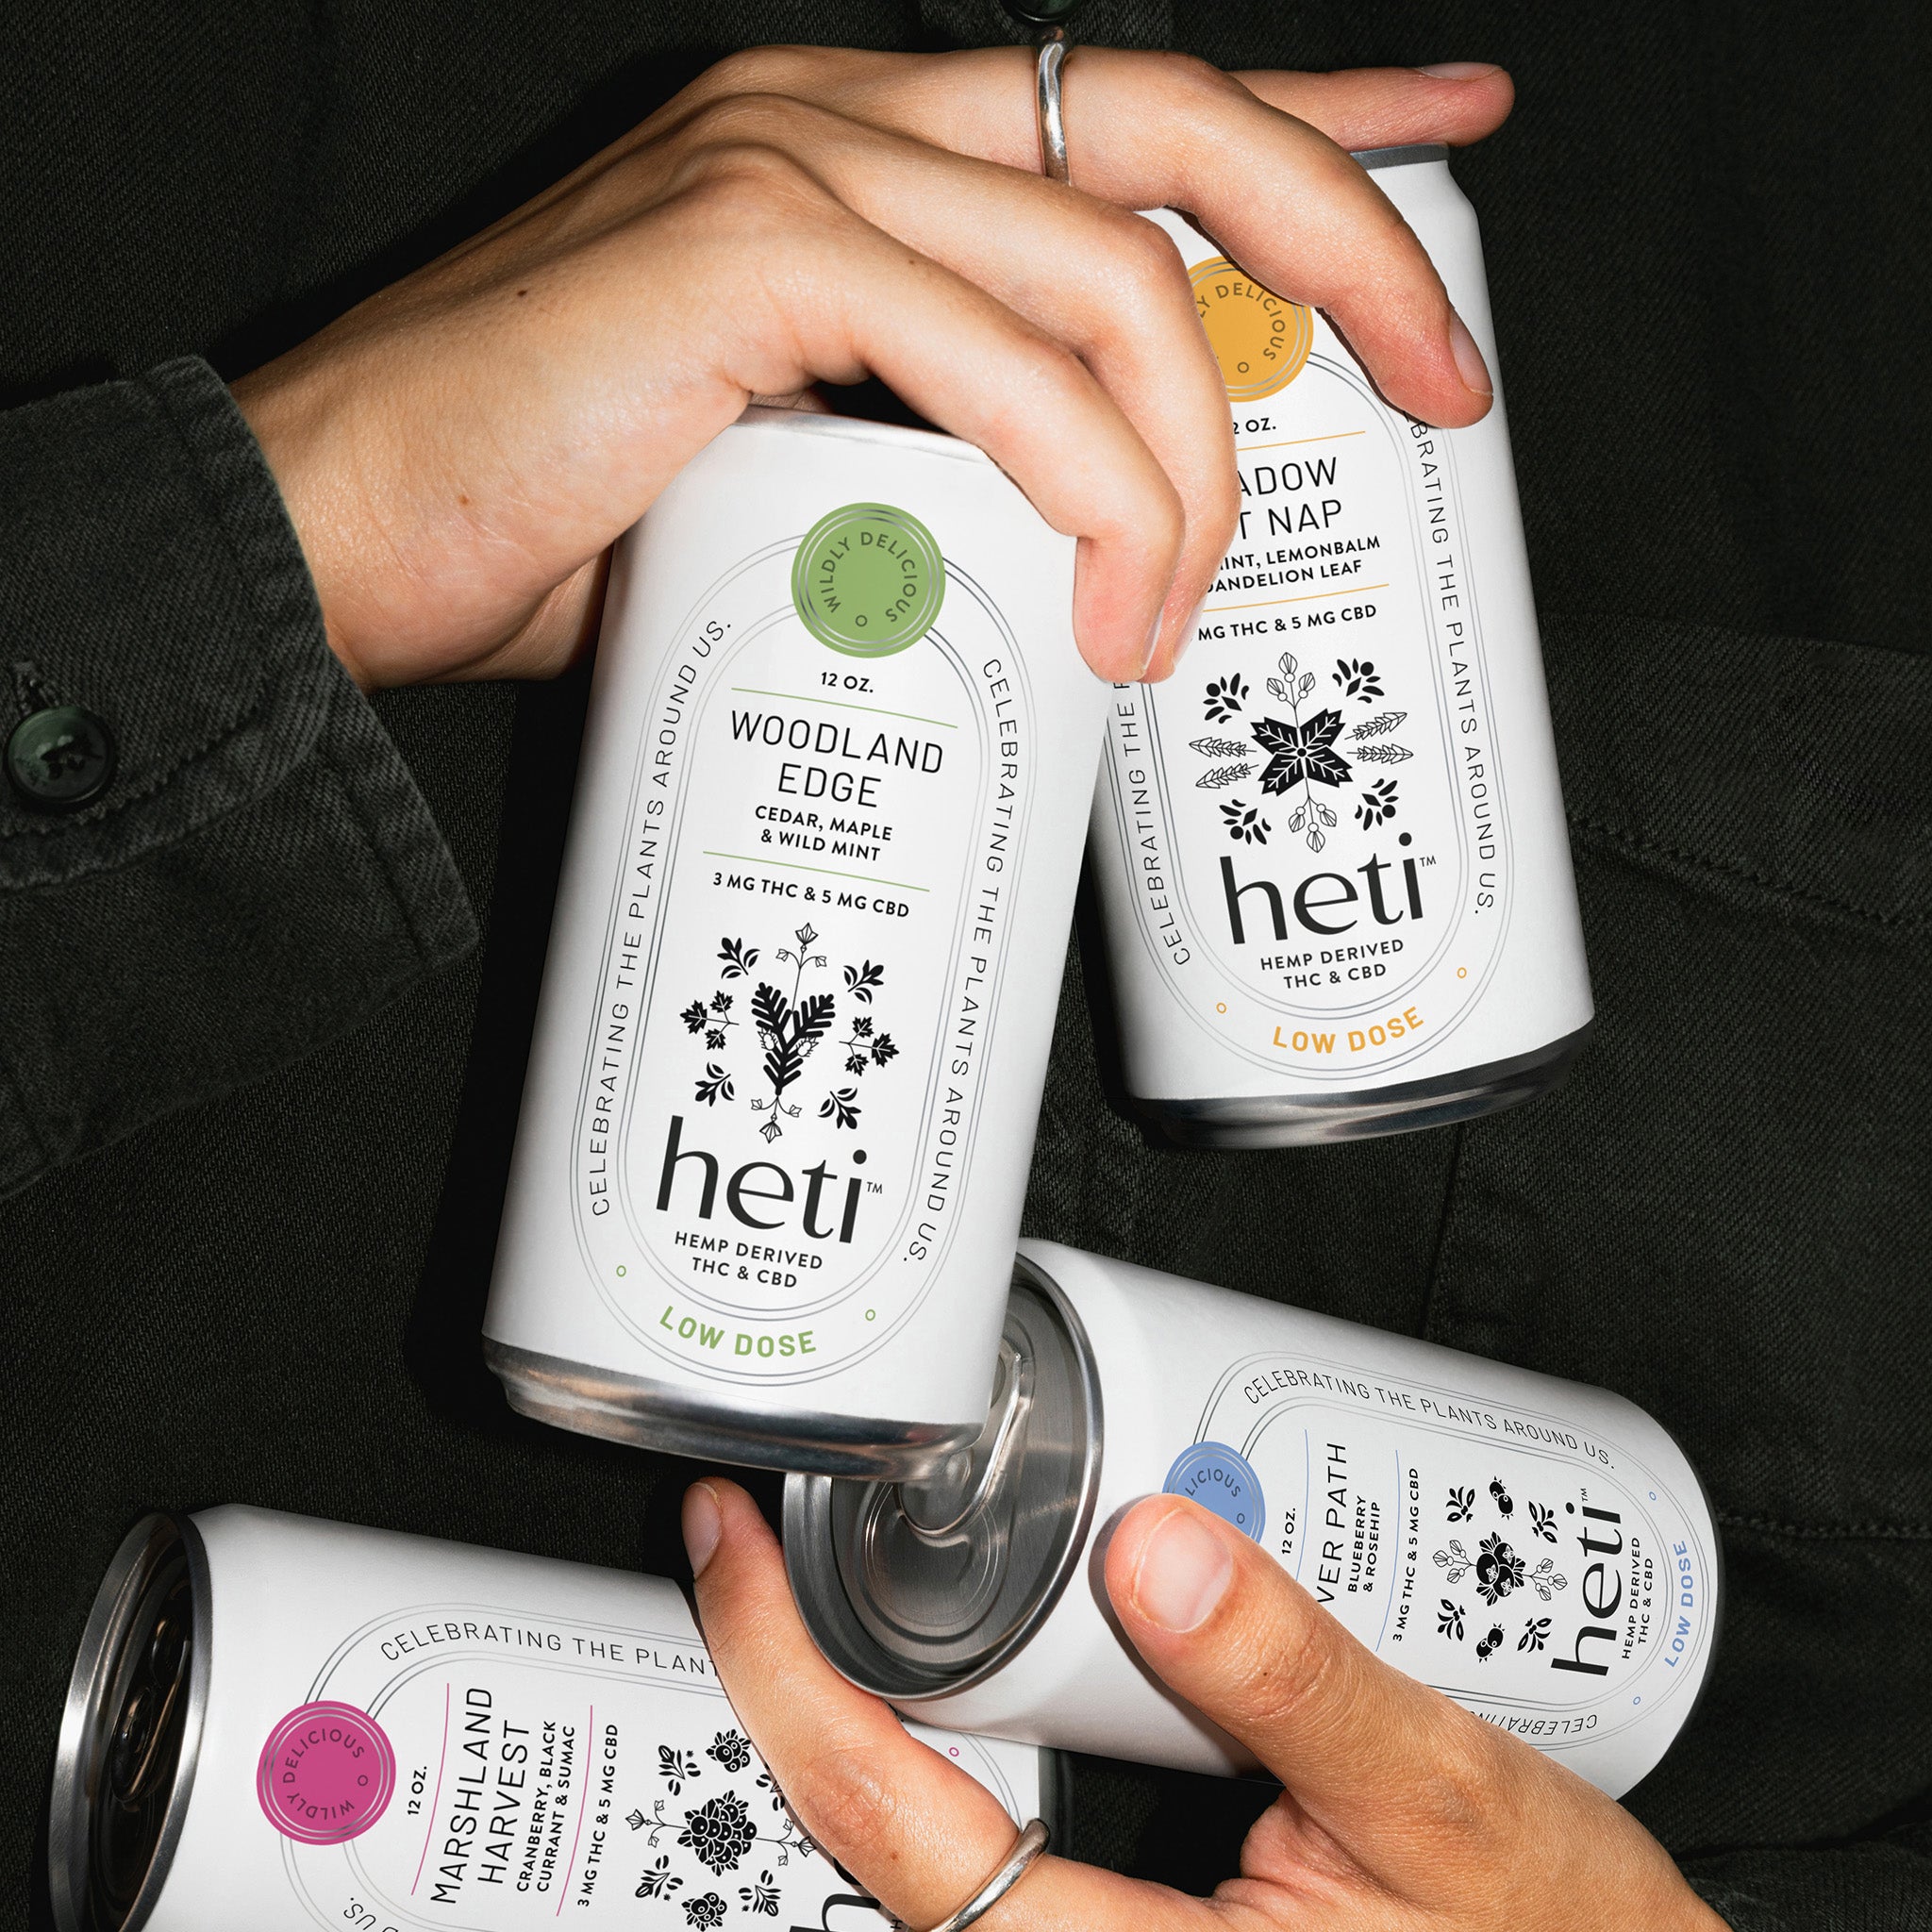 Hands holding all four flavors of Heti THC beverages River Path, Marshland Harvest, Meadow Cat Nap, and Woodland Edge